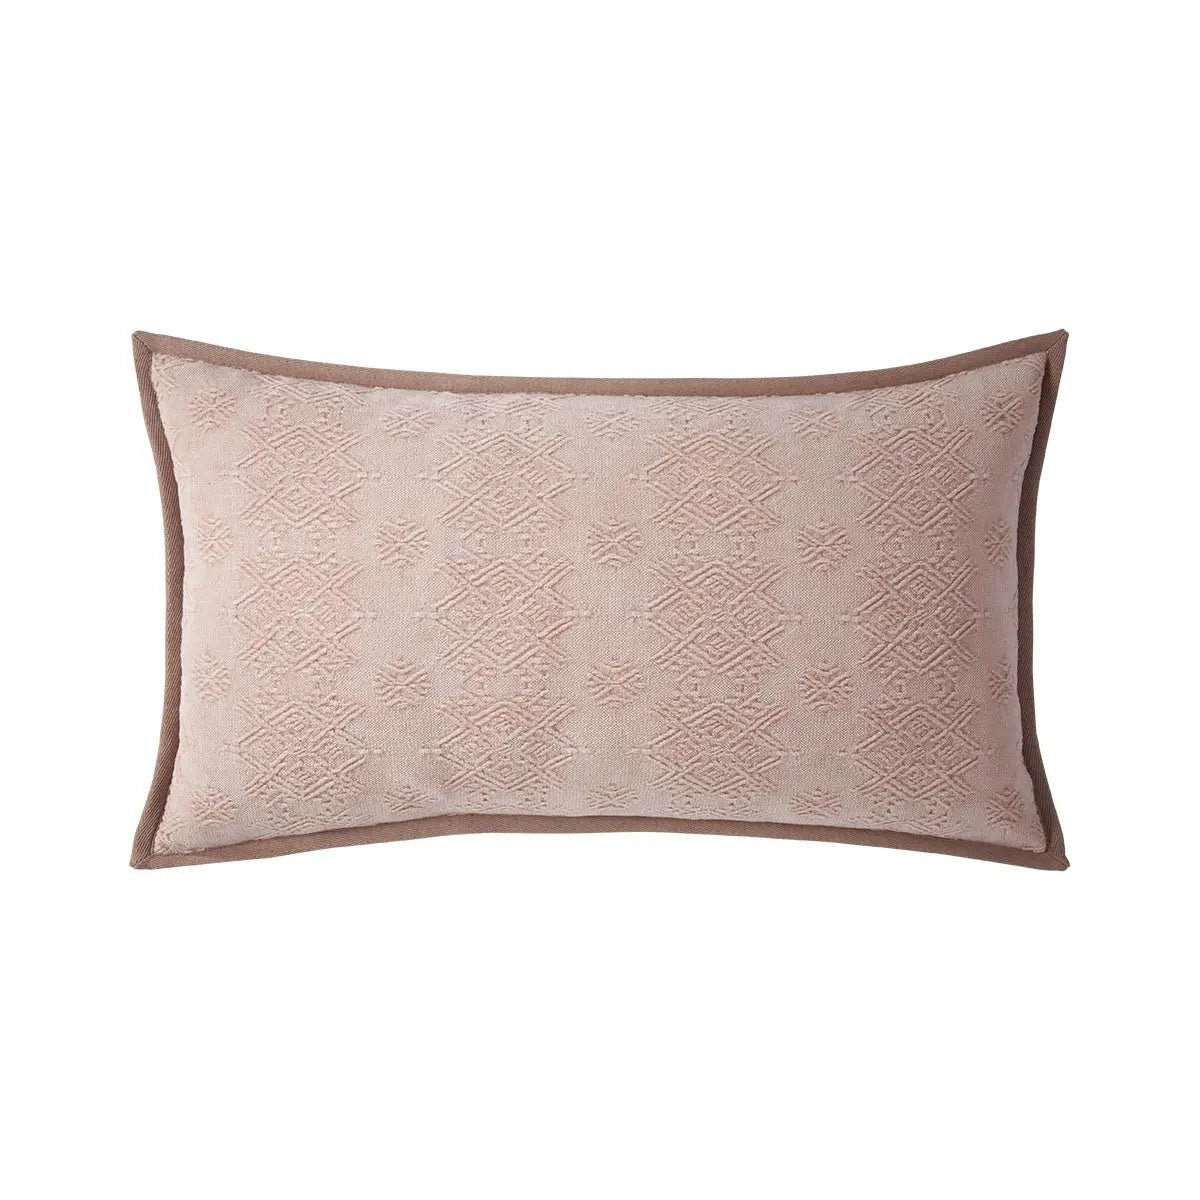 Yves Delorme Syracuse 13x22 Decorative Pillow in Petale